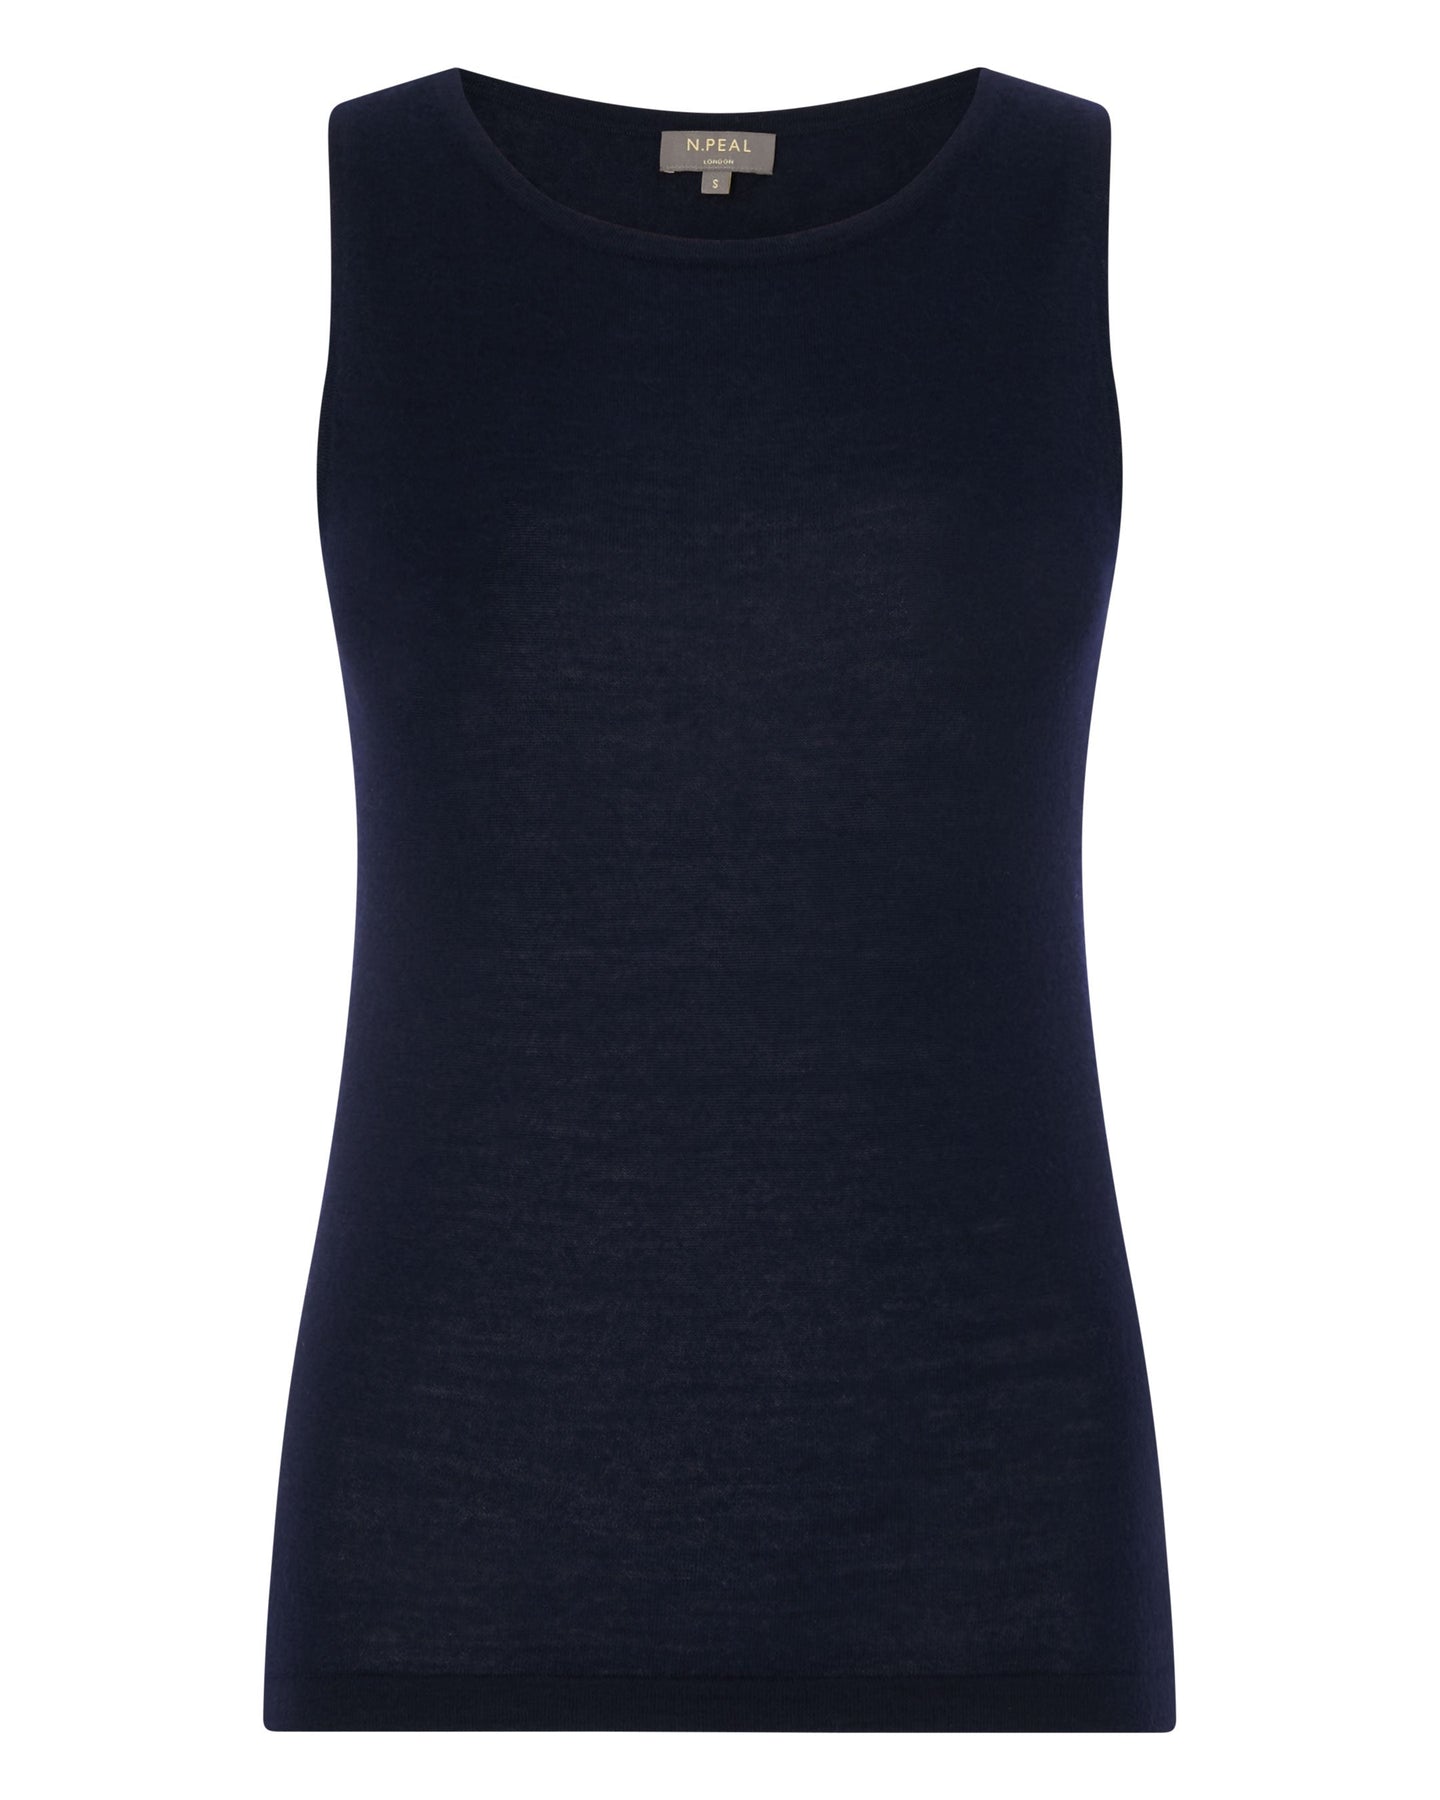 N.Peal Women's Superfine Cashmere Shell Top Navy Blue